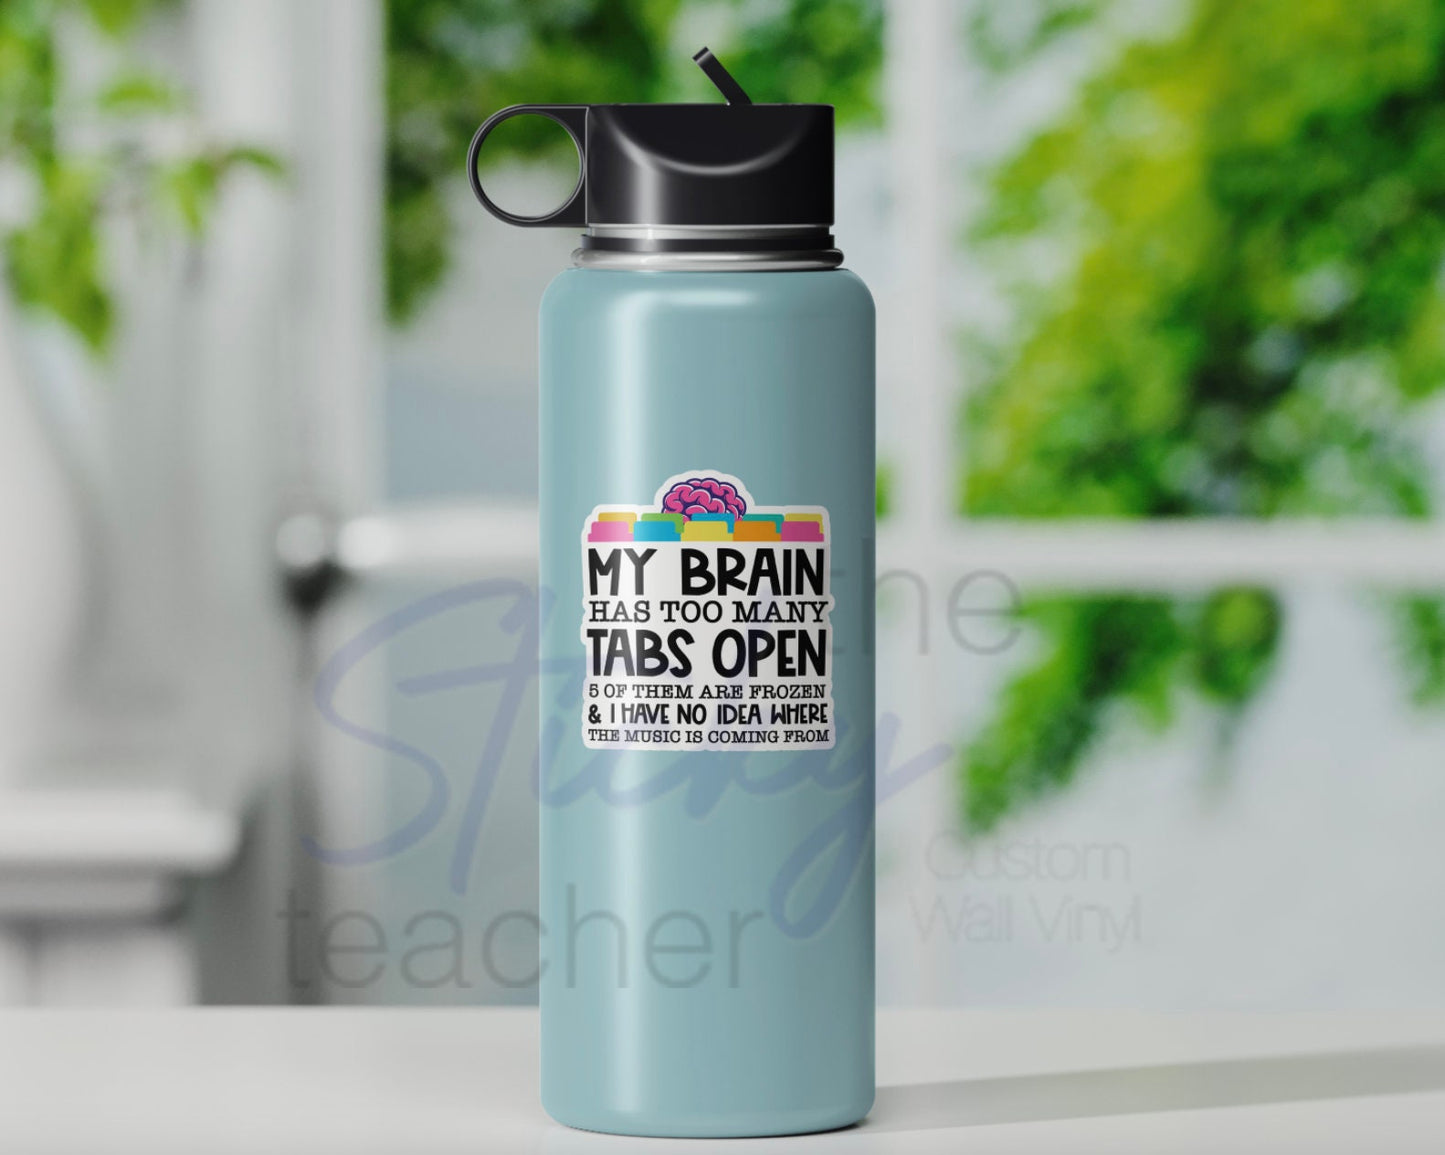 My brain has too many tabs open Sticker, Water Bottle Decal Funny Vinyl Decals, funny mom gift stickers, Water Bottle Decal, Teacher Gift